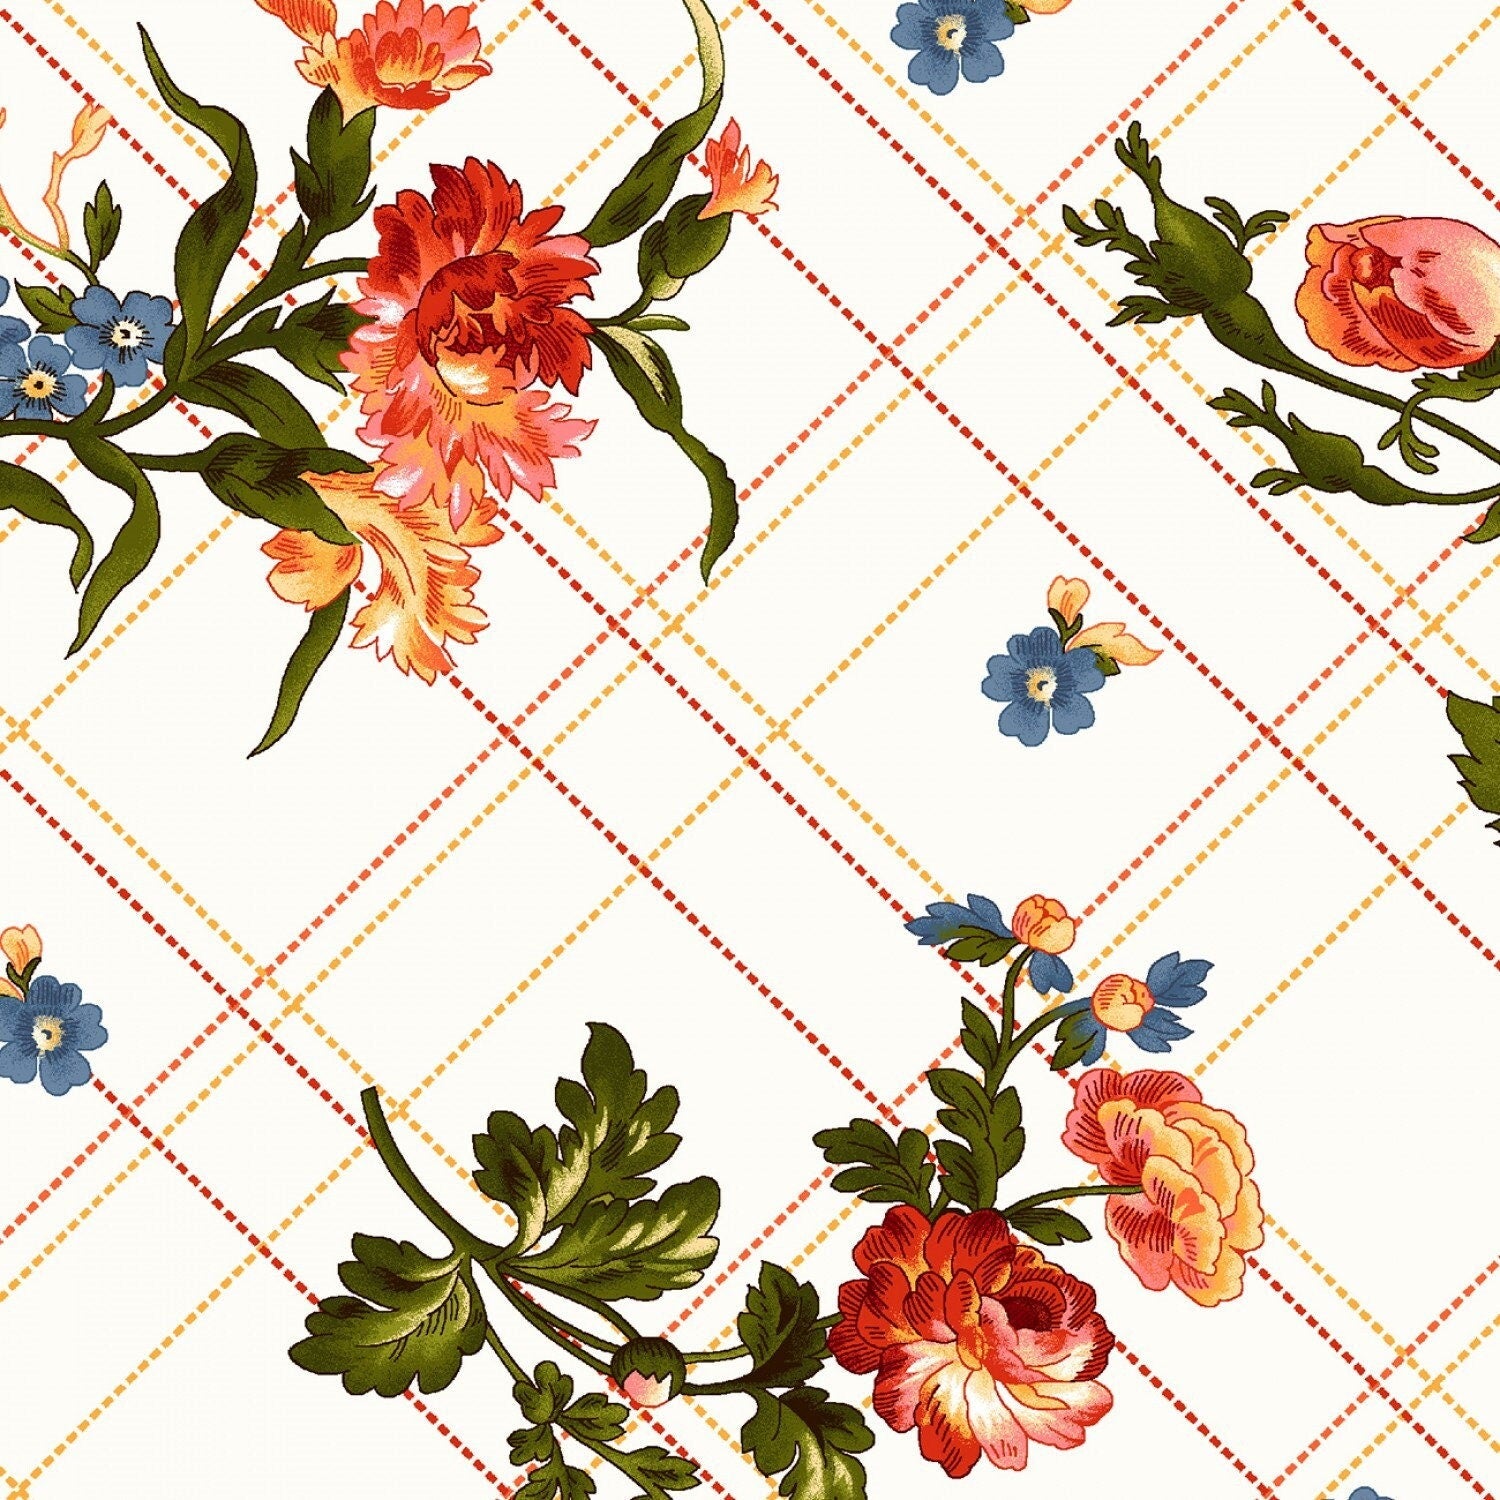 Belle Epoque Bias Plaid Floral 3 yard quilt kit. One yard of each of 3 coordinating fabrics perfect for a quick and easy quilt.